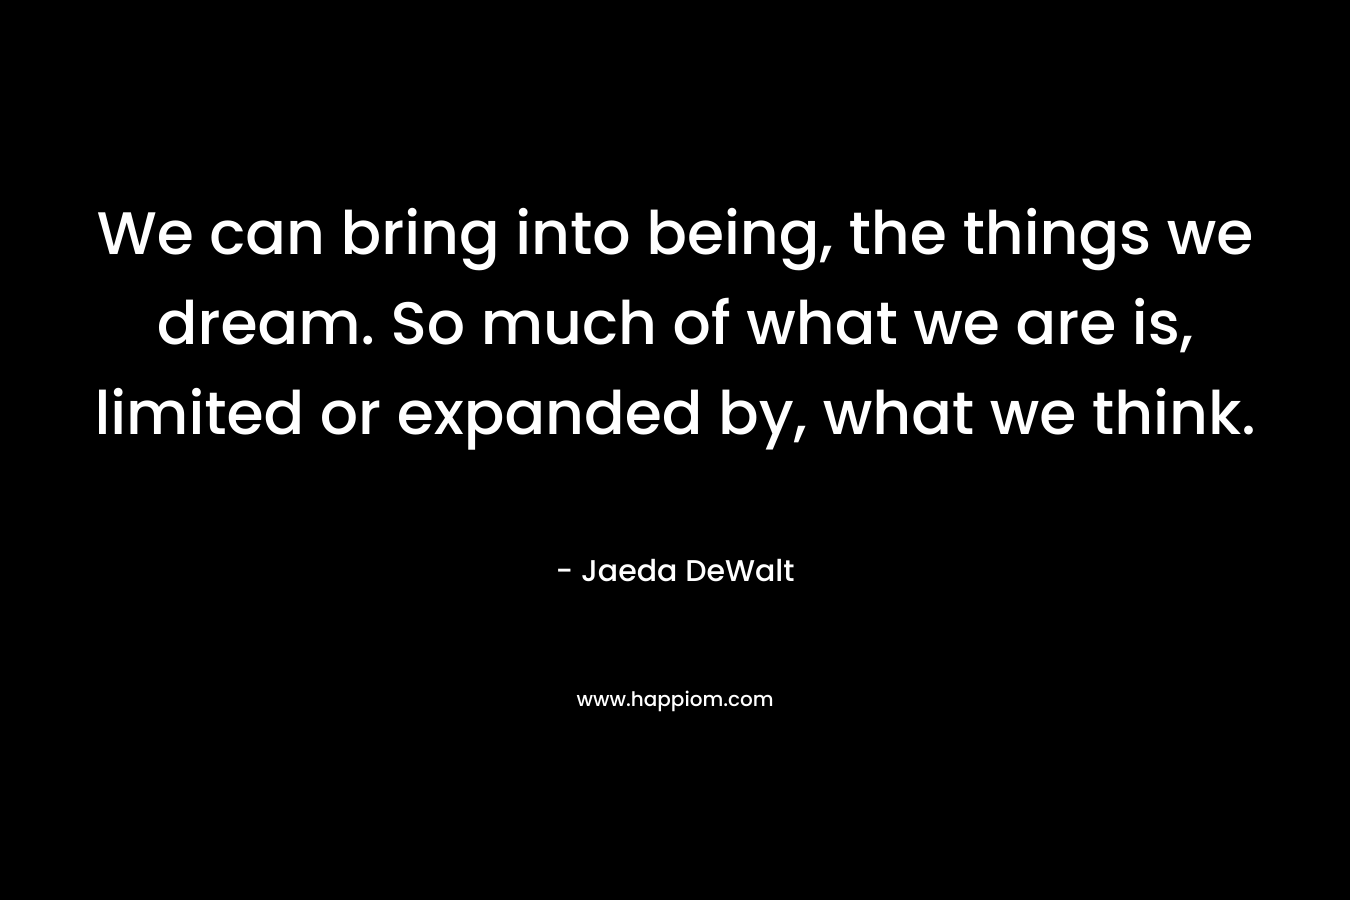 We can bring into being, the things we dream. So much of what we are is, limited or expanded by, what we think. – Jaeda DeWalt